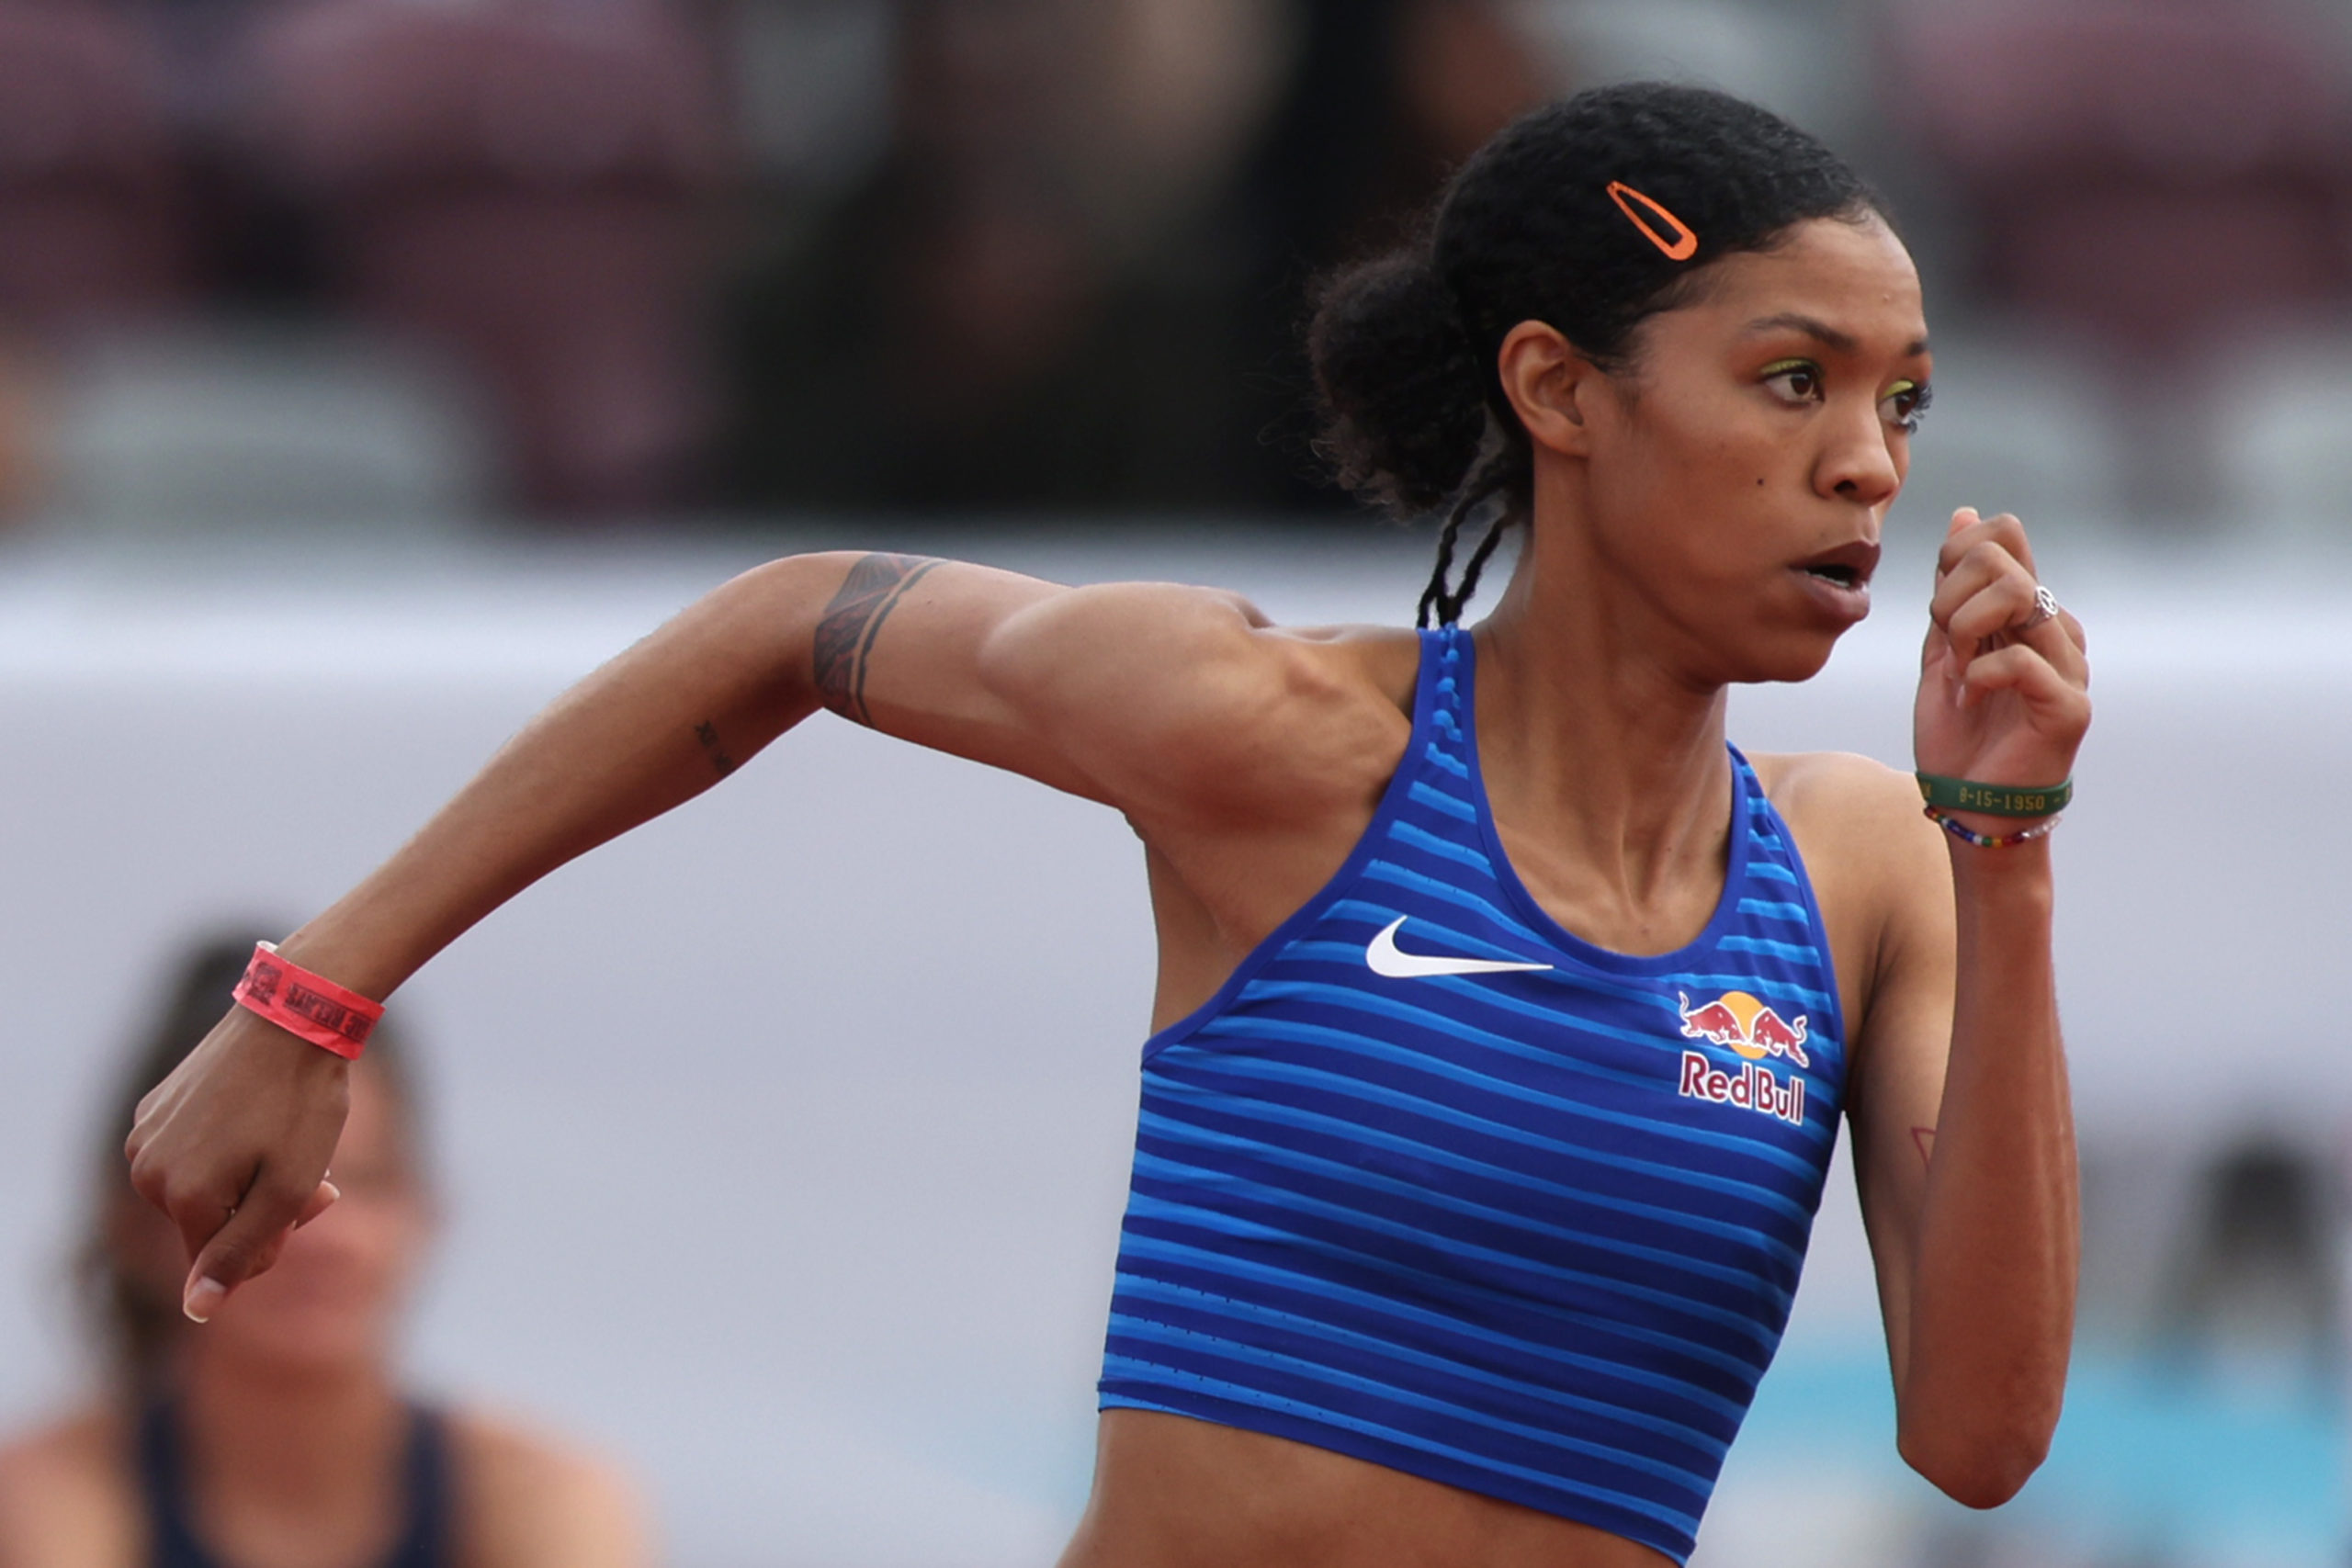 Vashti Cunningham ready to prove herself, on and off the track - Just Women's  Sports